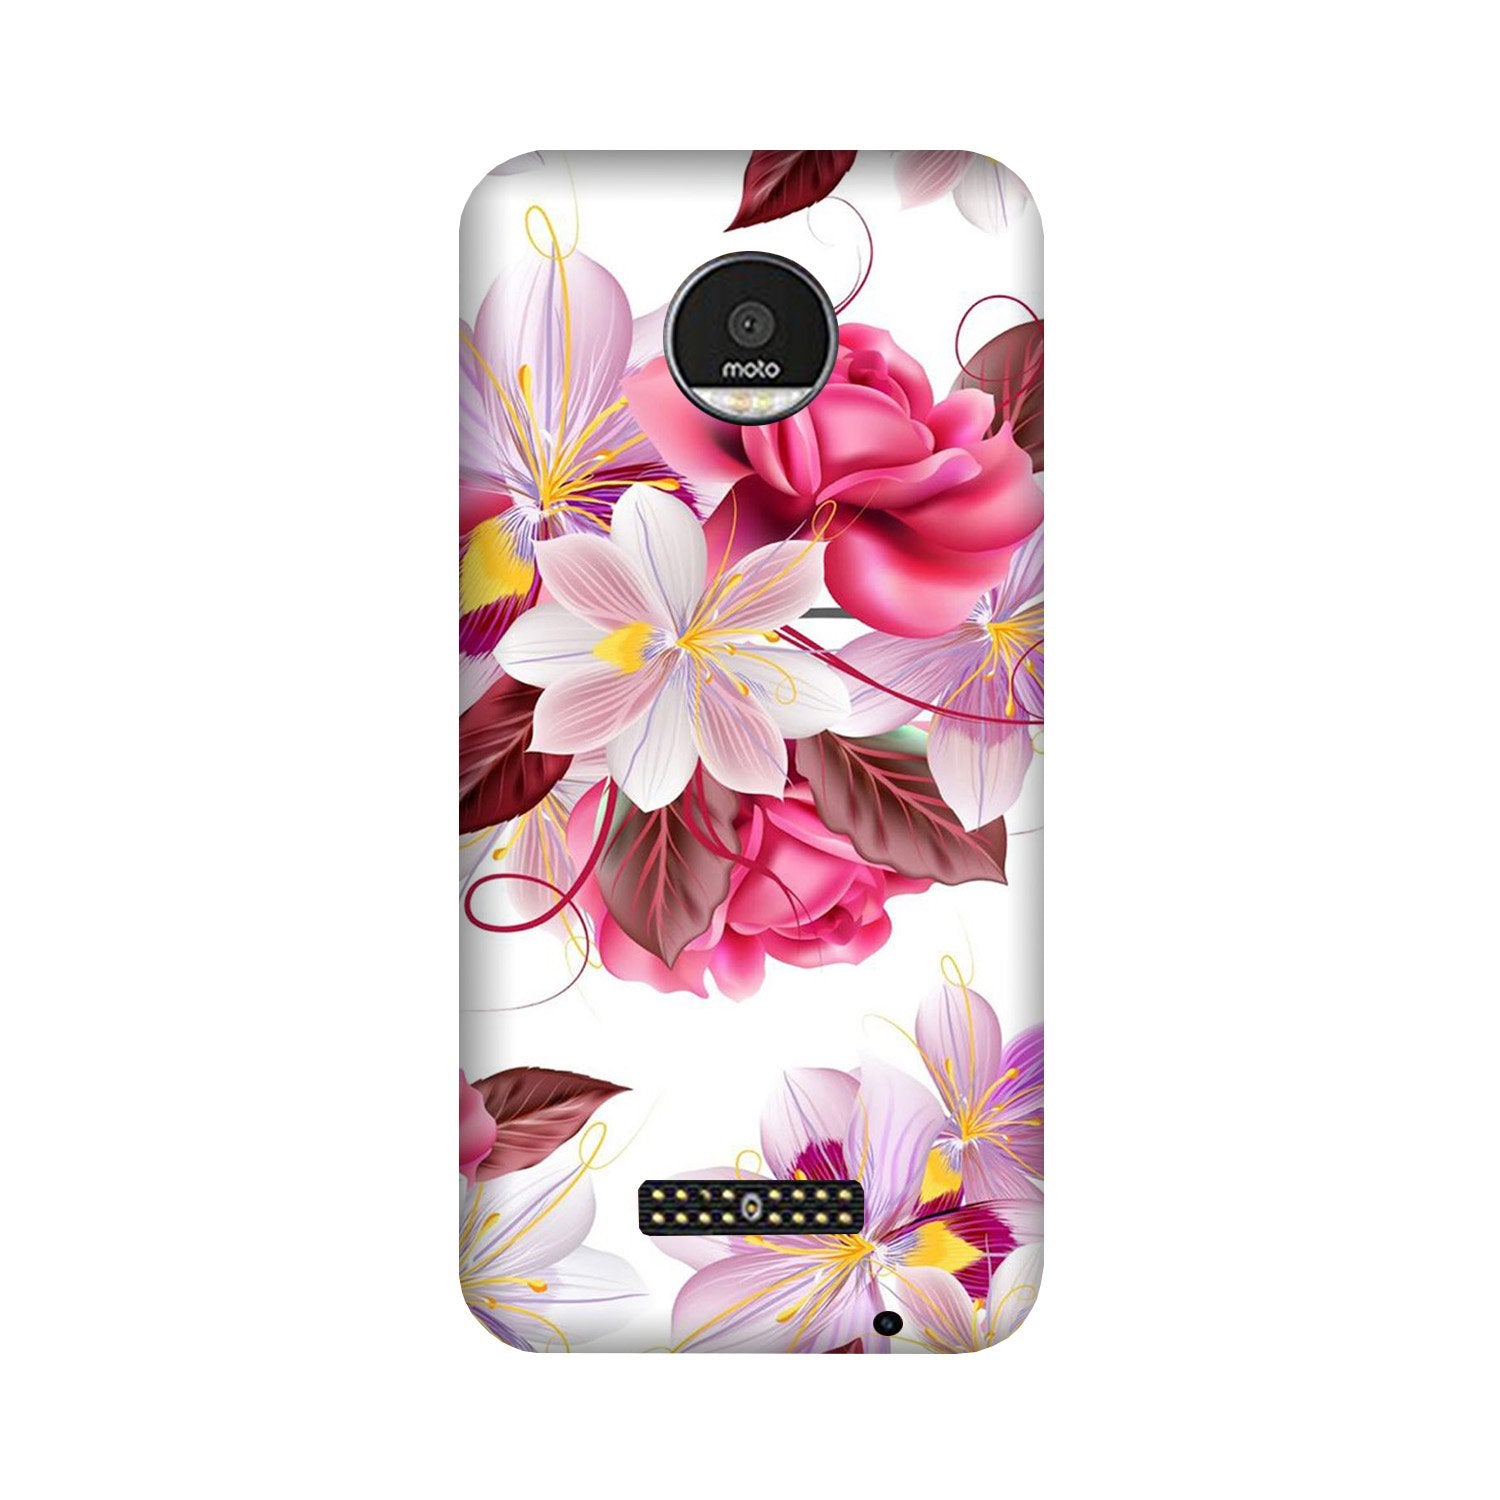 Beautiful flowers Case for Moto Z Play